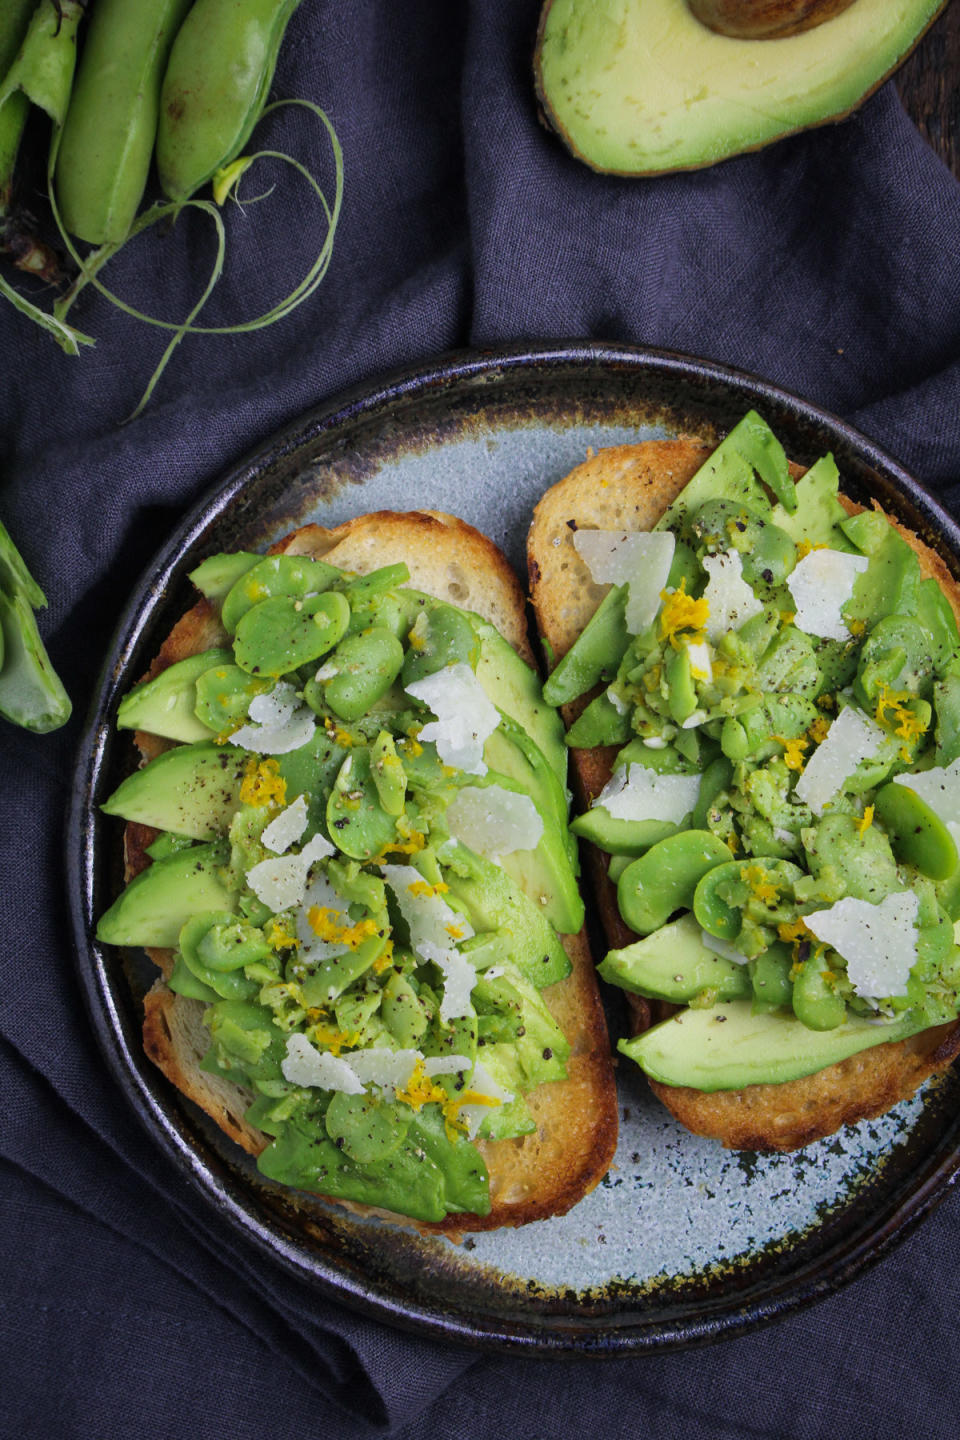 Avocado toast with fava beans and cheese.